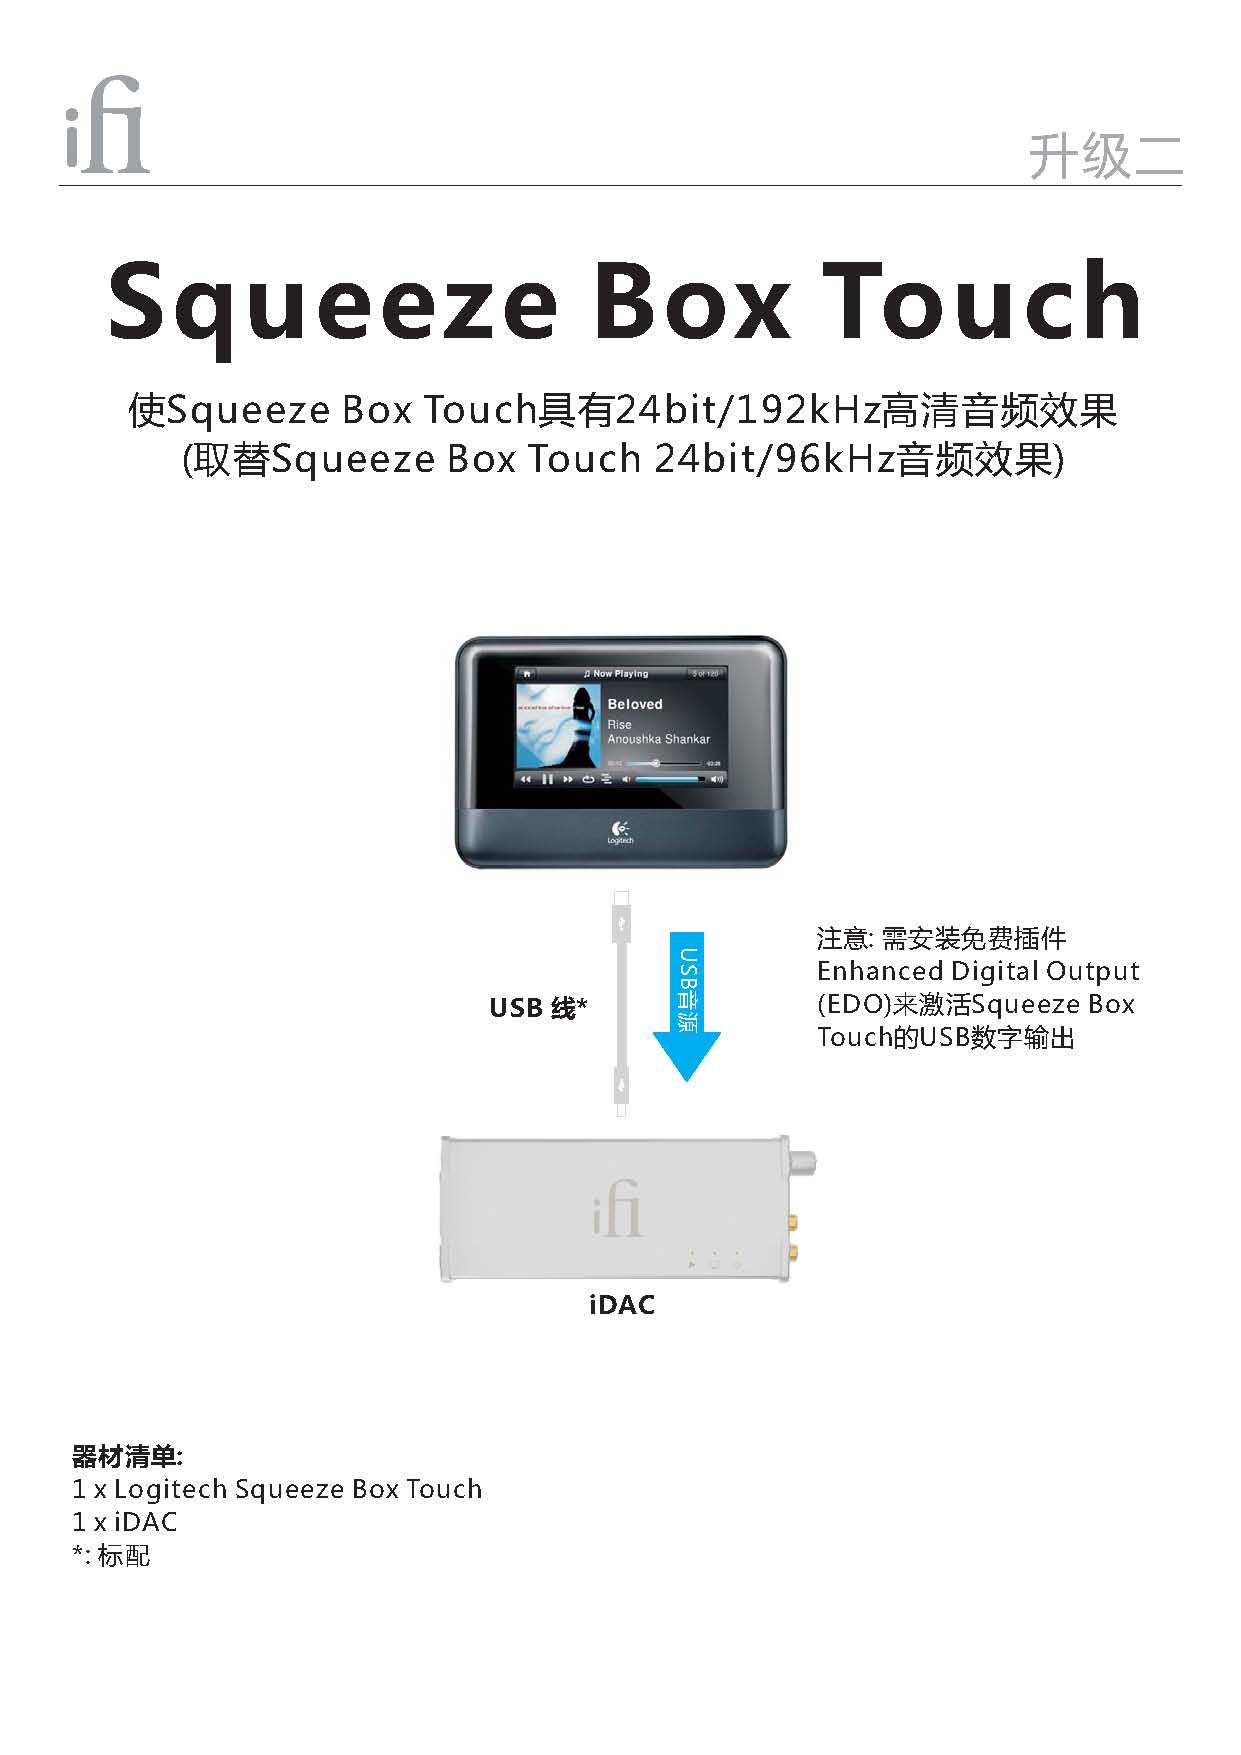 Squeeze Box Touch_CN Ver0.4_ҳ_2.jpg